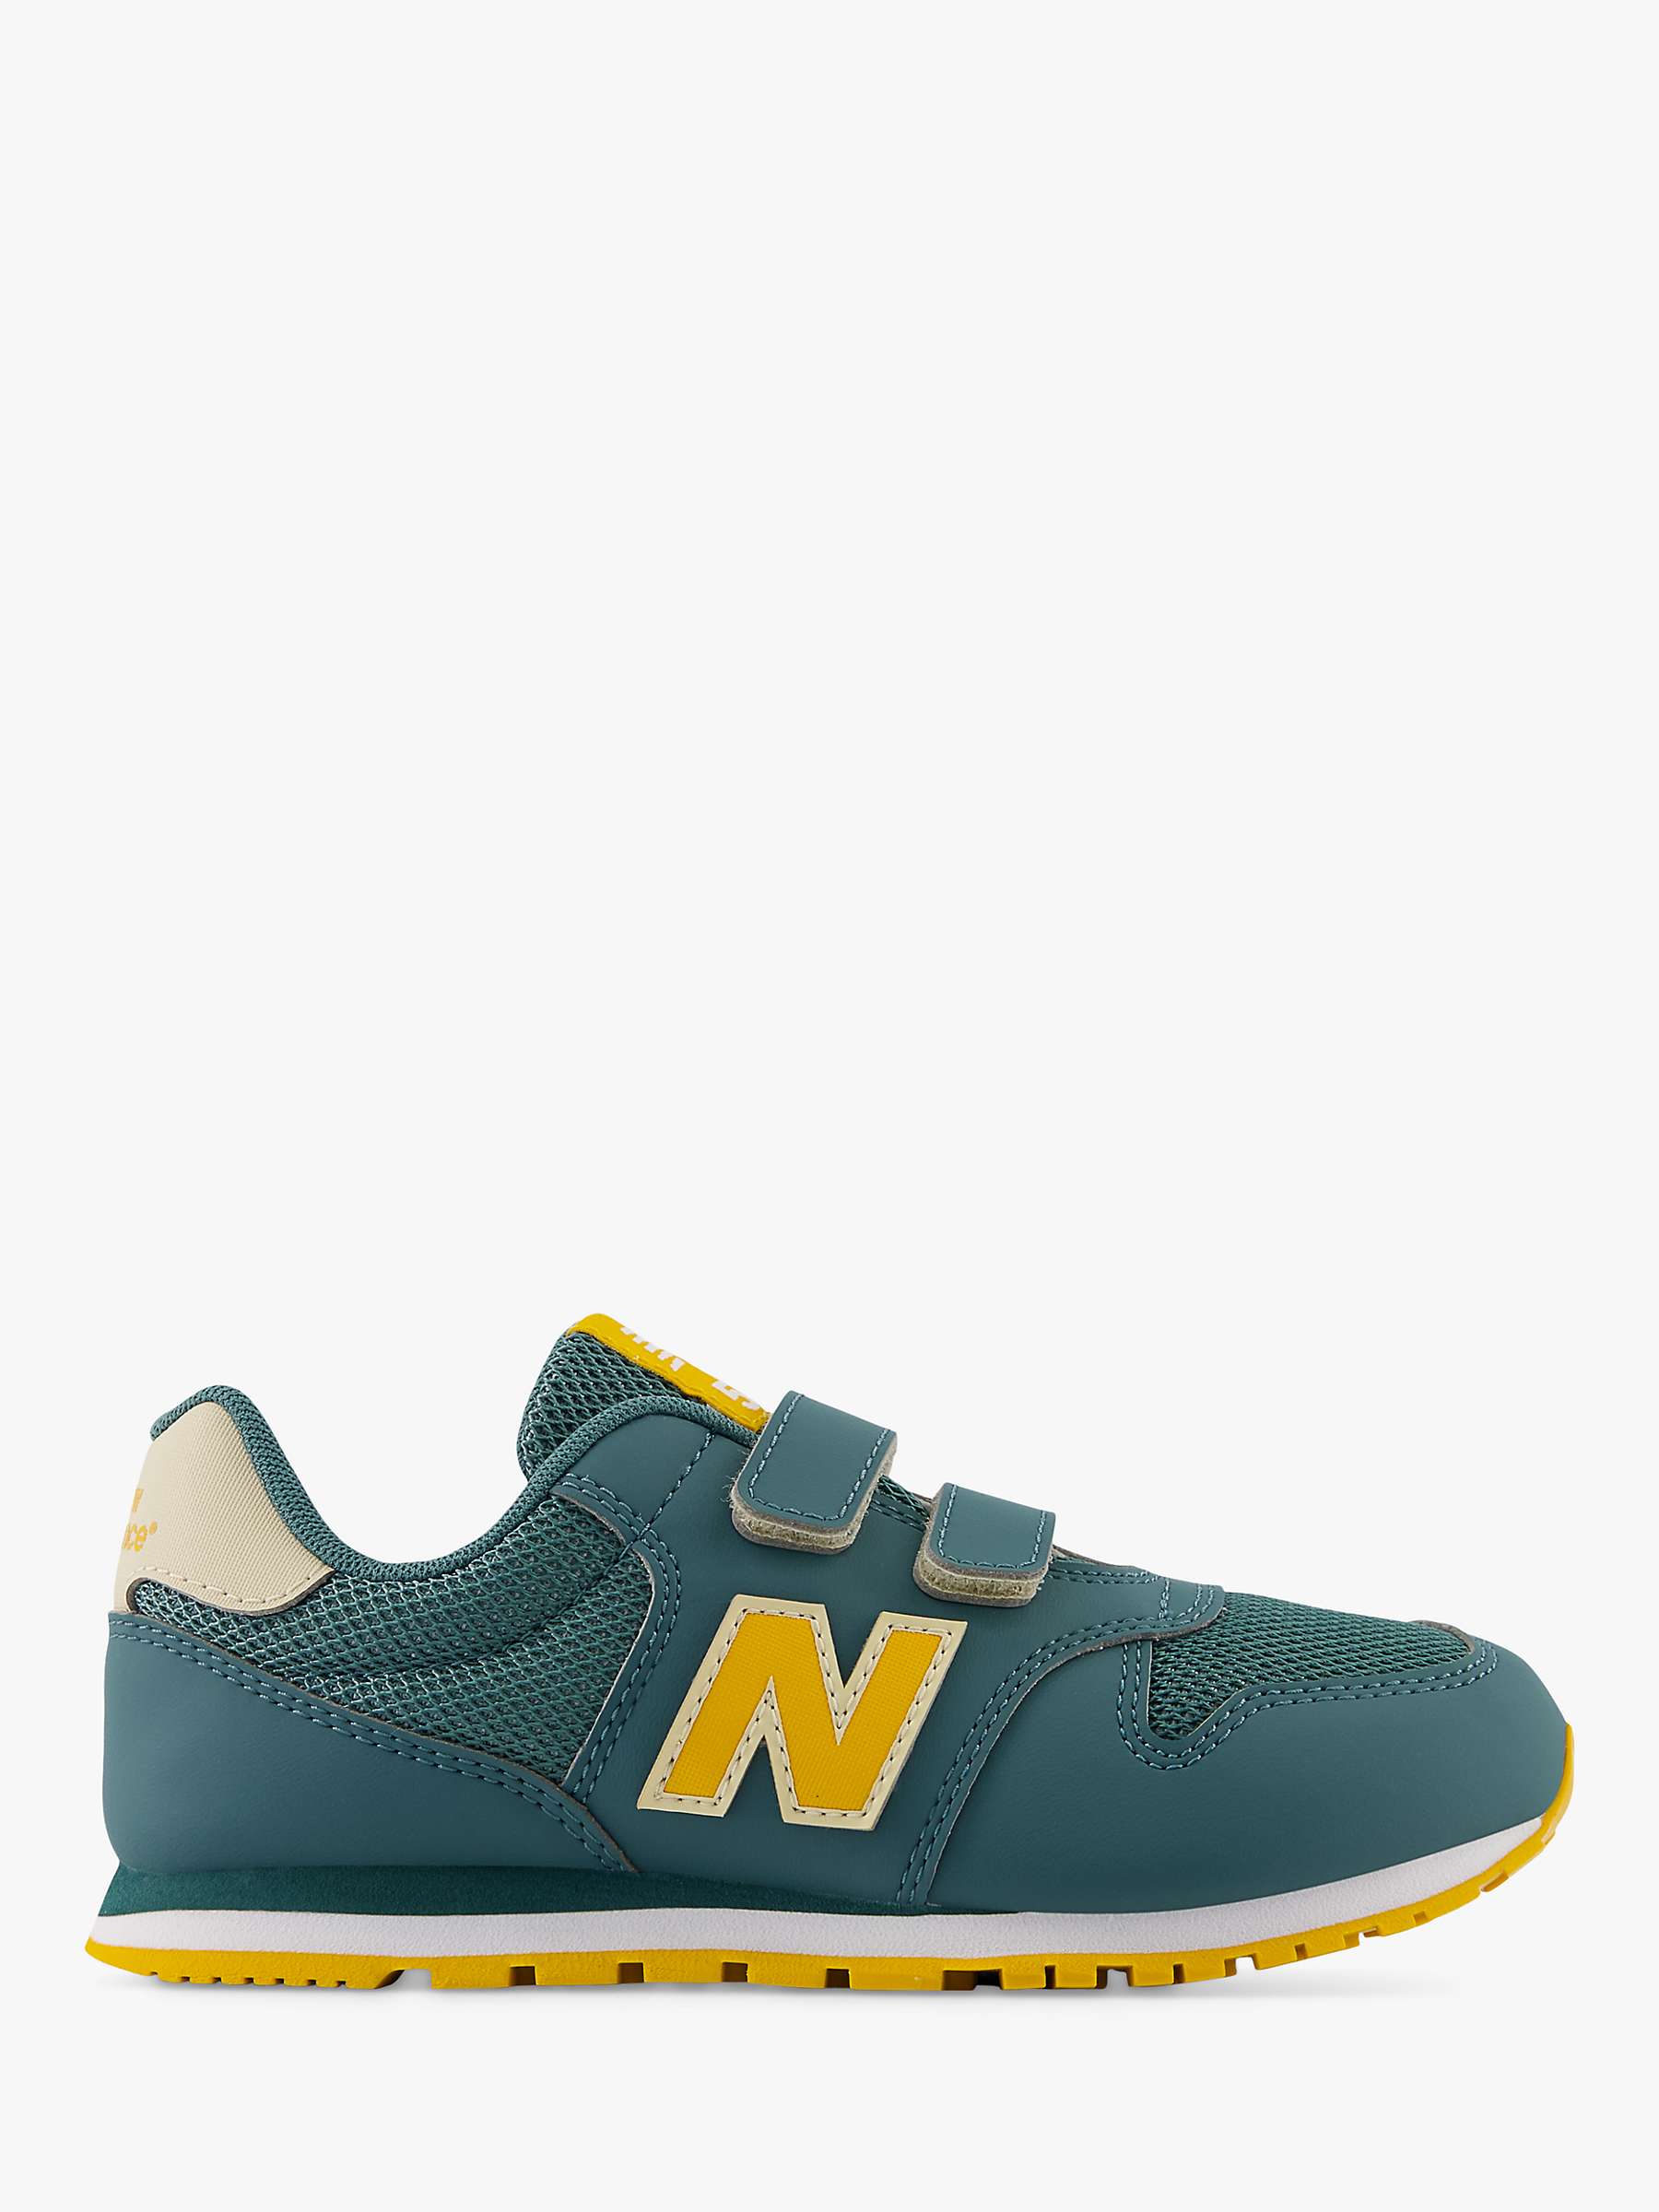 Buy New Balance Kids' 500 Riptape Trainers Online at johnlewis.com